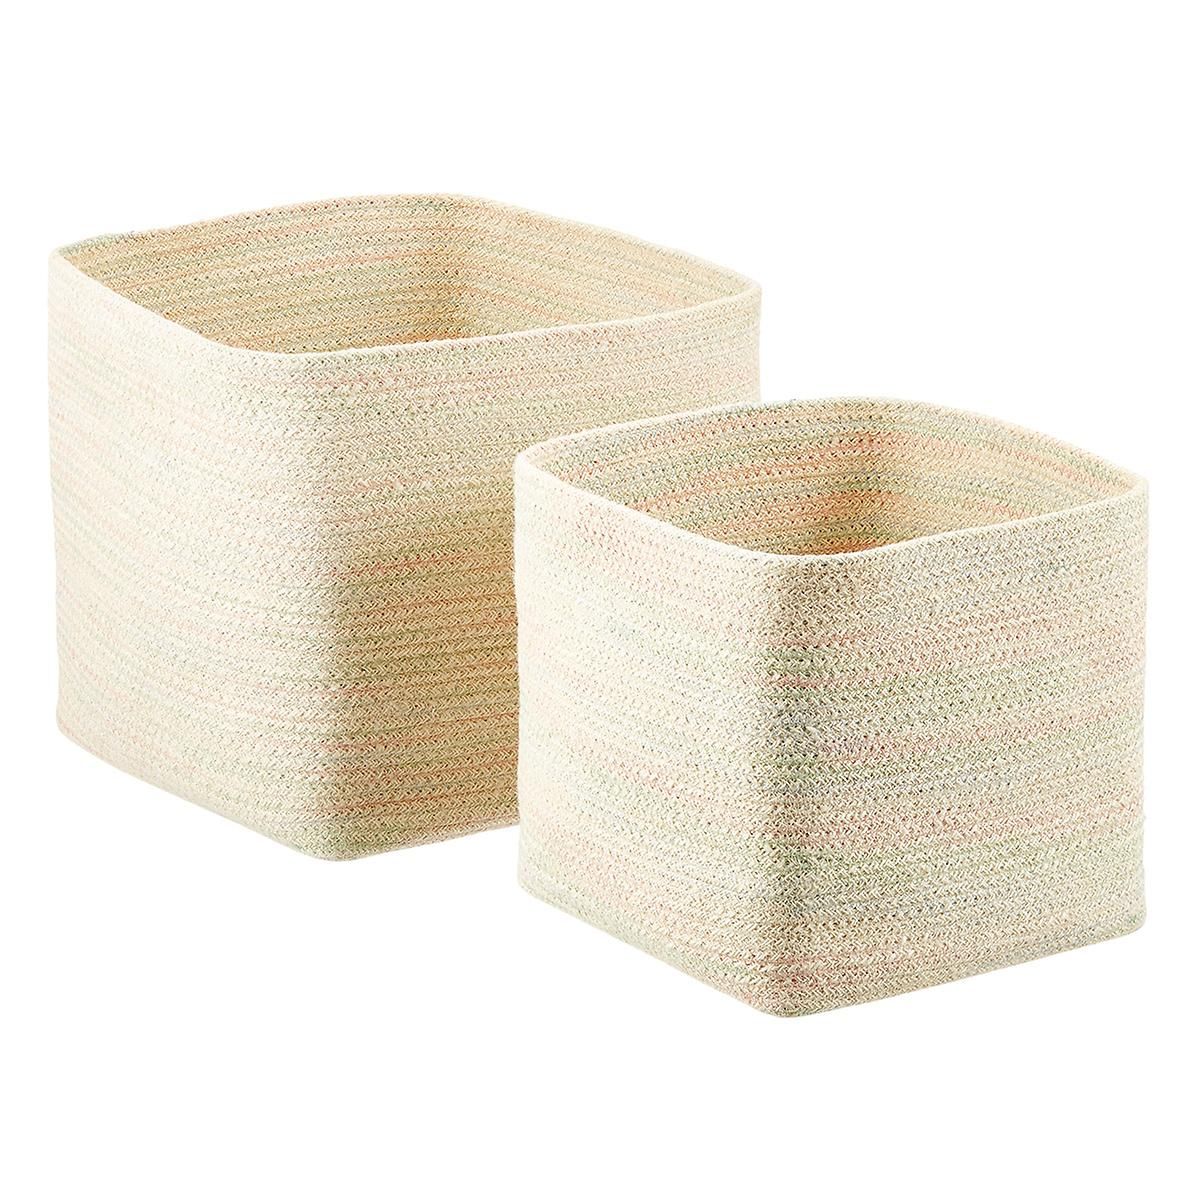 Large Jute Cube Rainbow/Natural | The Container Store